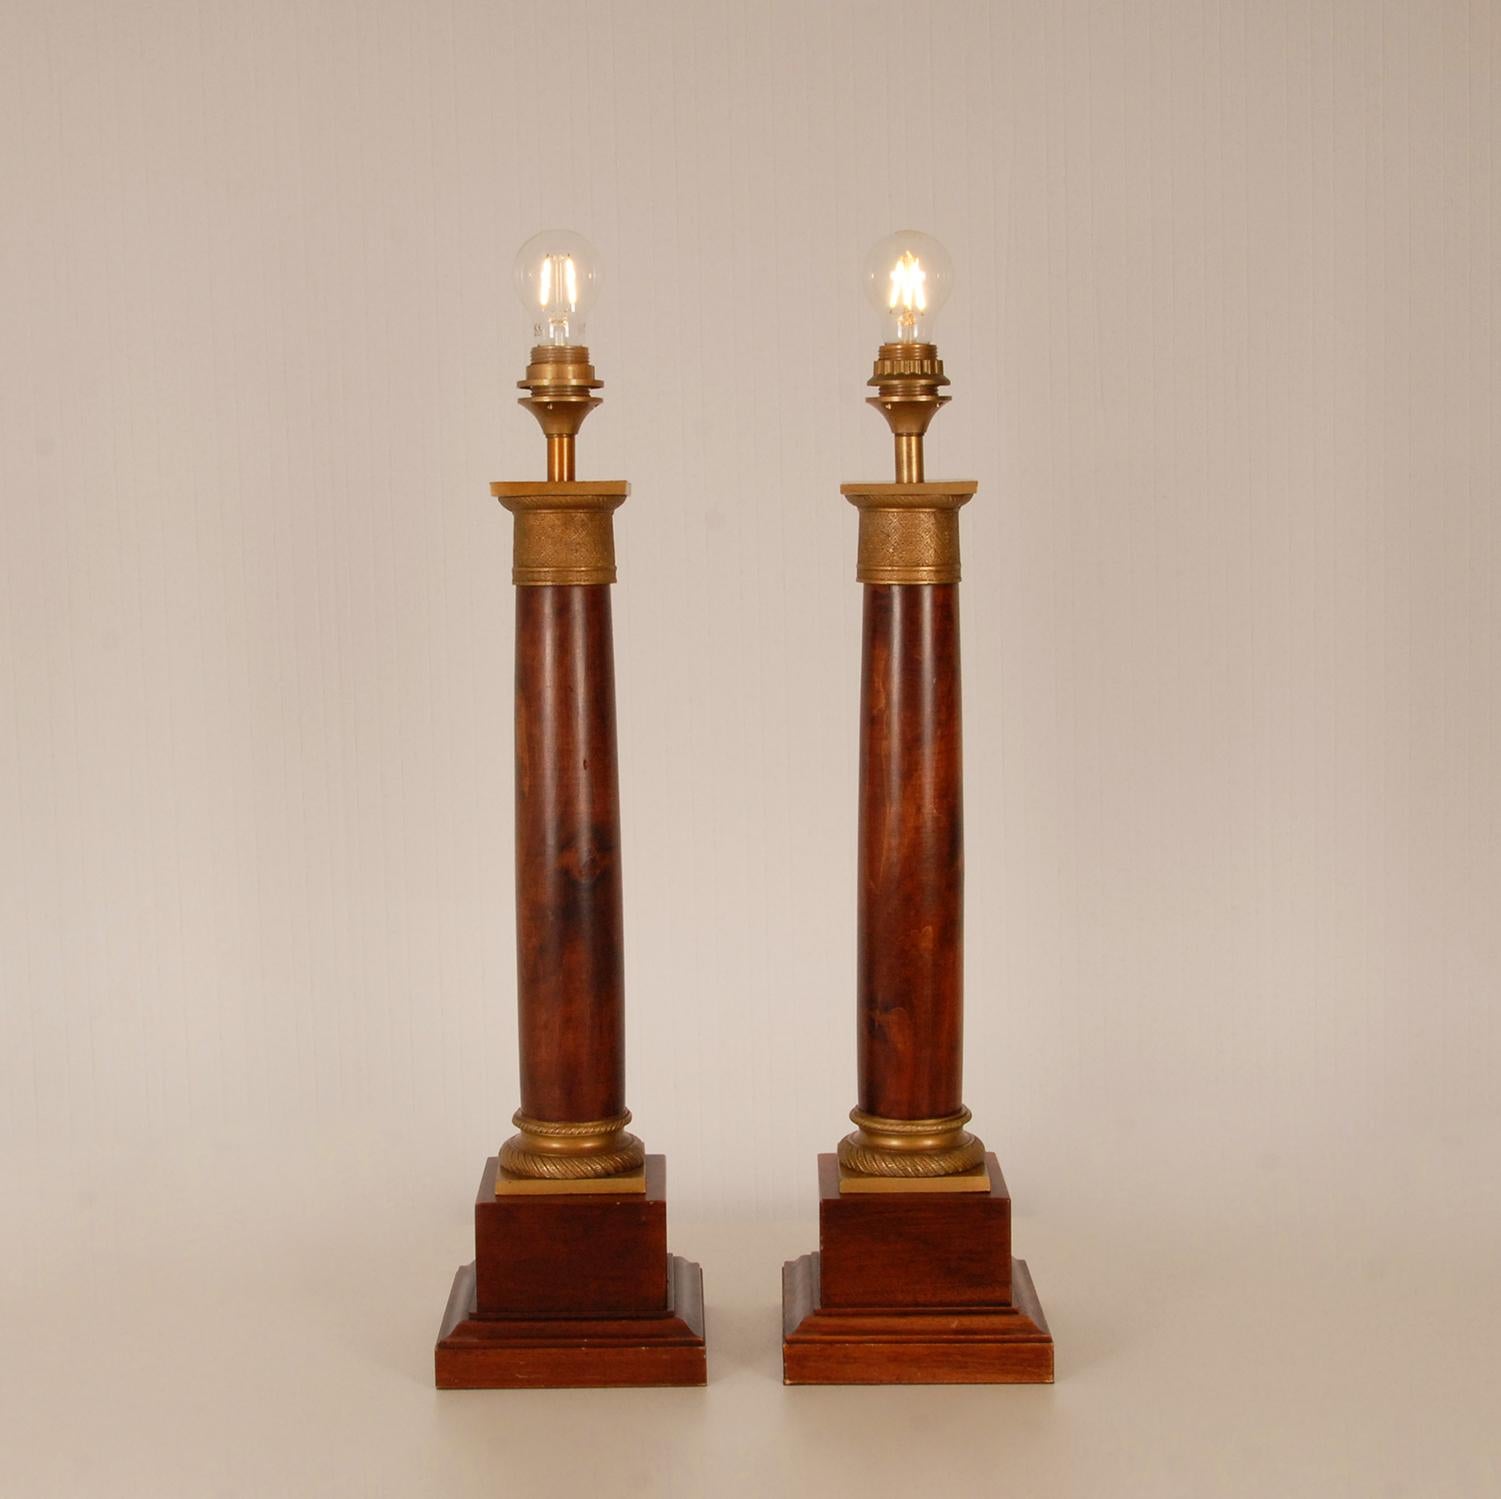 Empire Revival Empire Table Lamps Regency Gold Gilt Bronze Mahogany Column Lamps French a pair